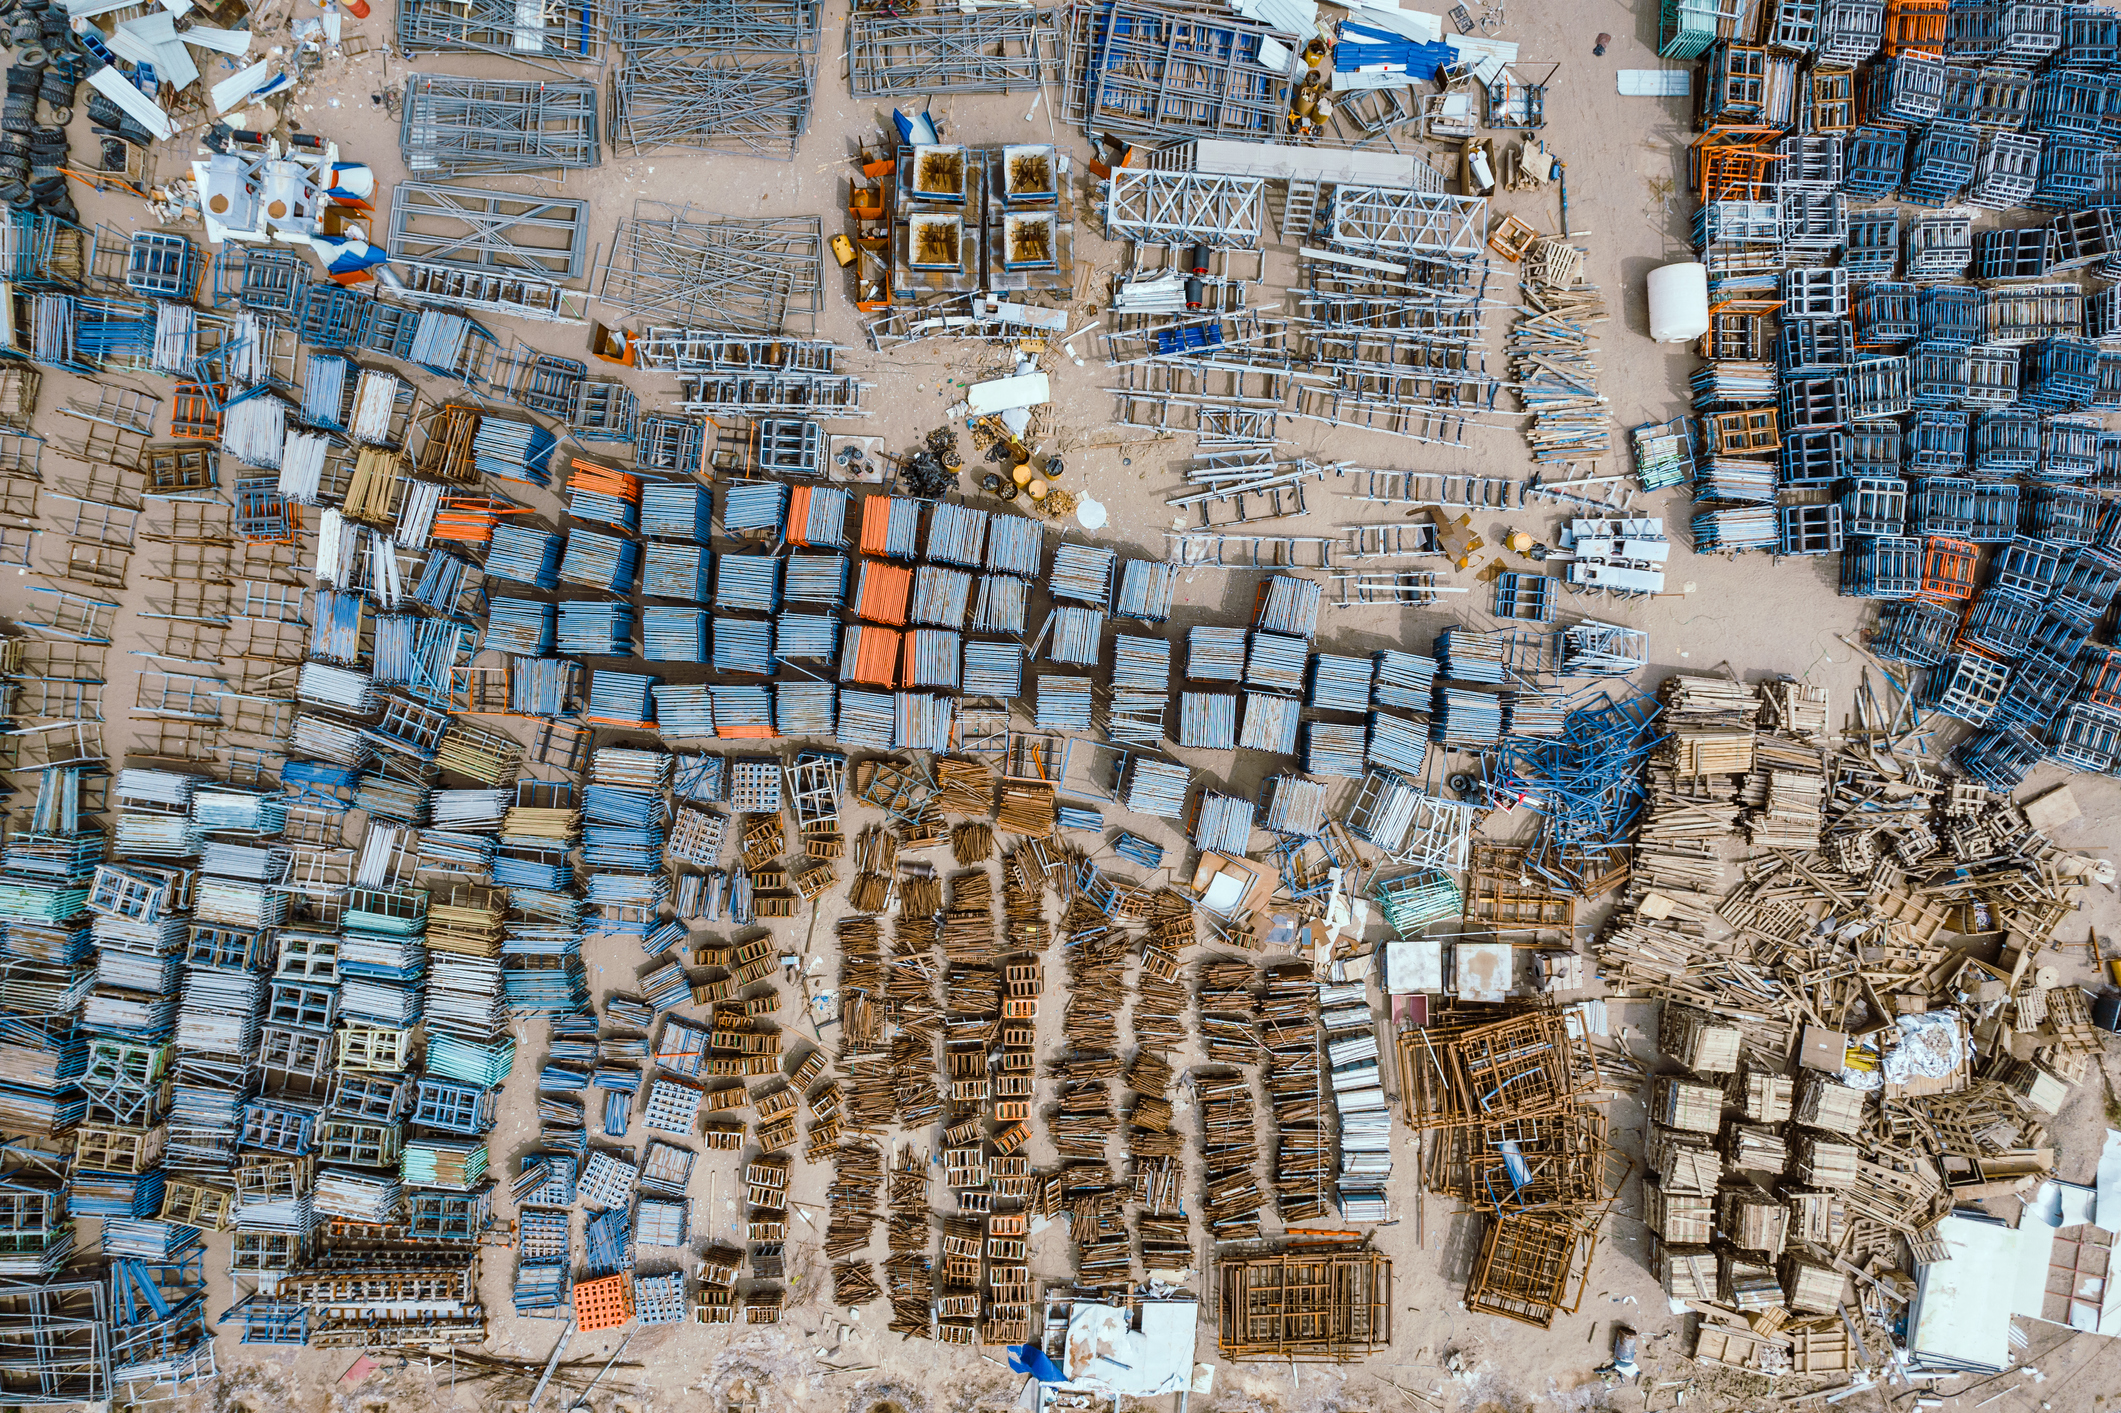 Solar systems dumped in a giant landfill.